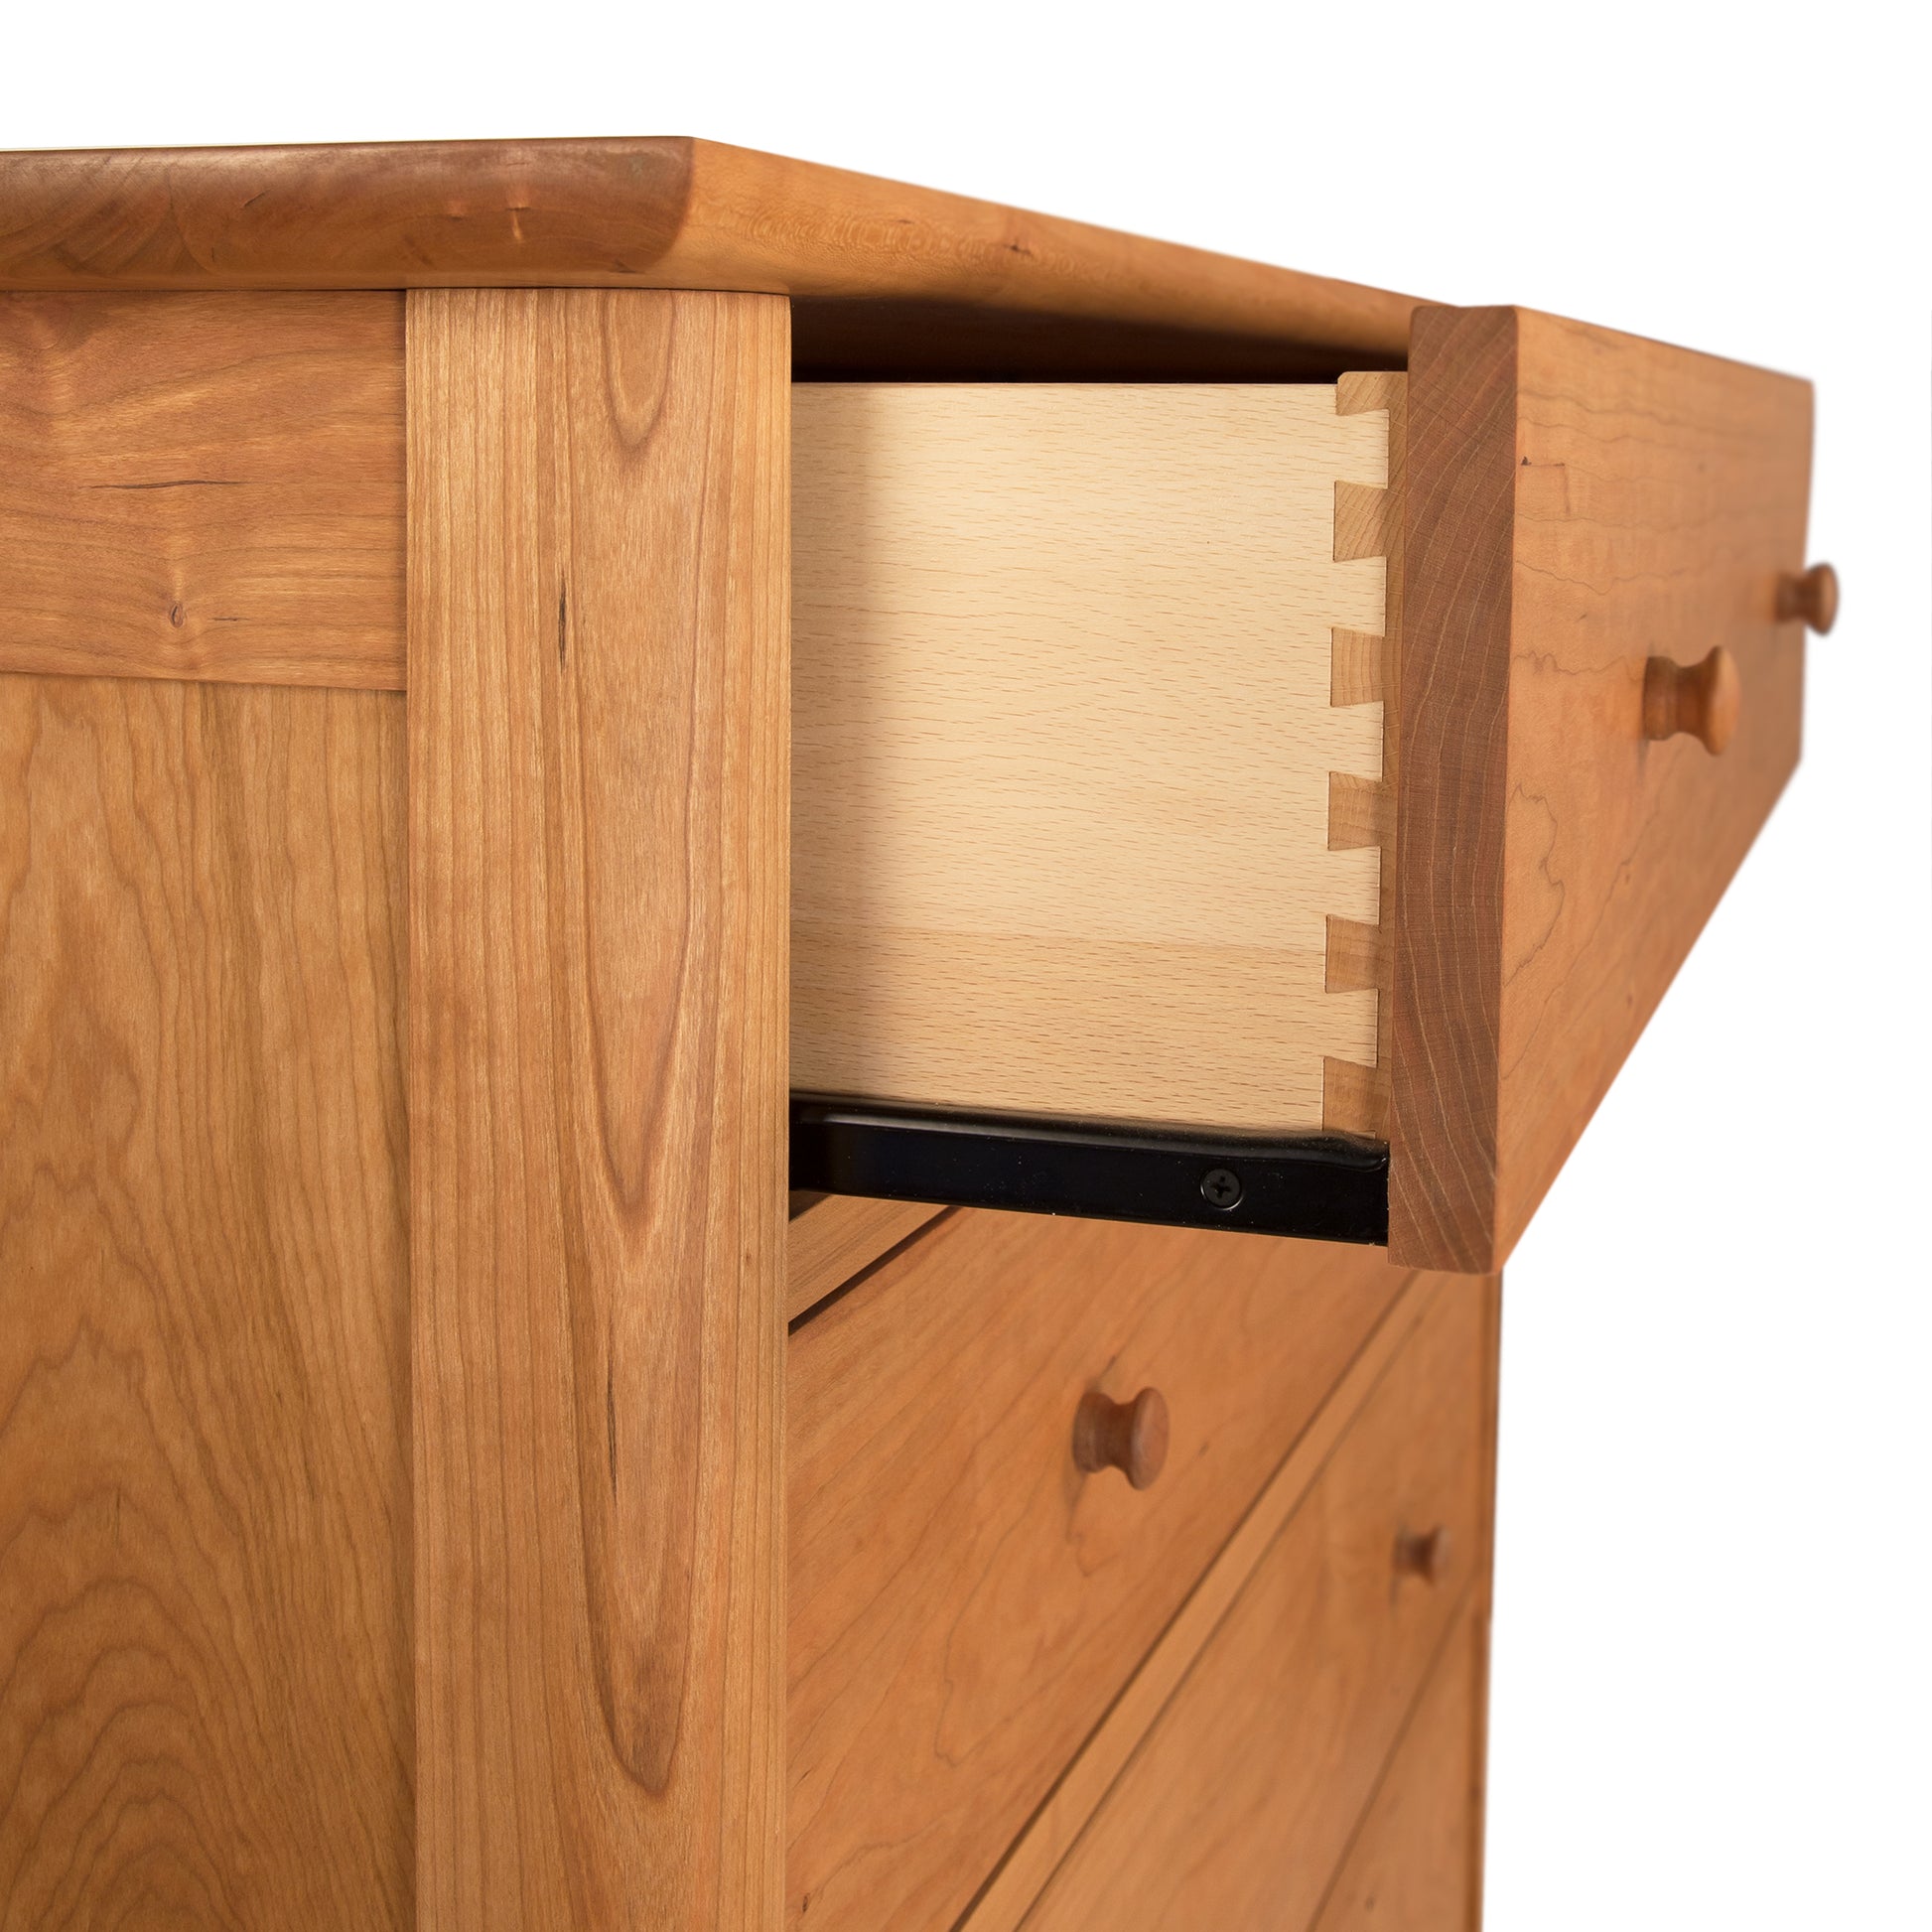 A Vermont Furniture Designs Heartwood Shaker 5-Drawer Chest with one open drawer showing dovetail joinery.